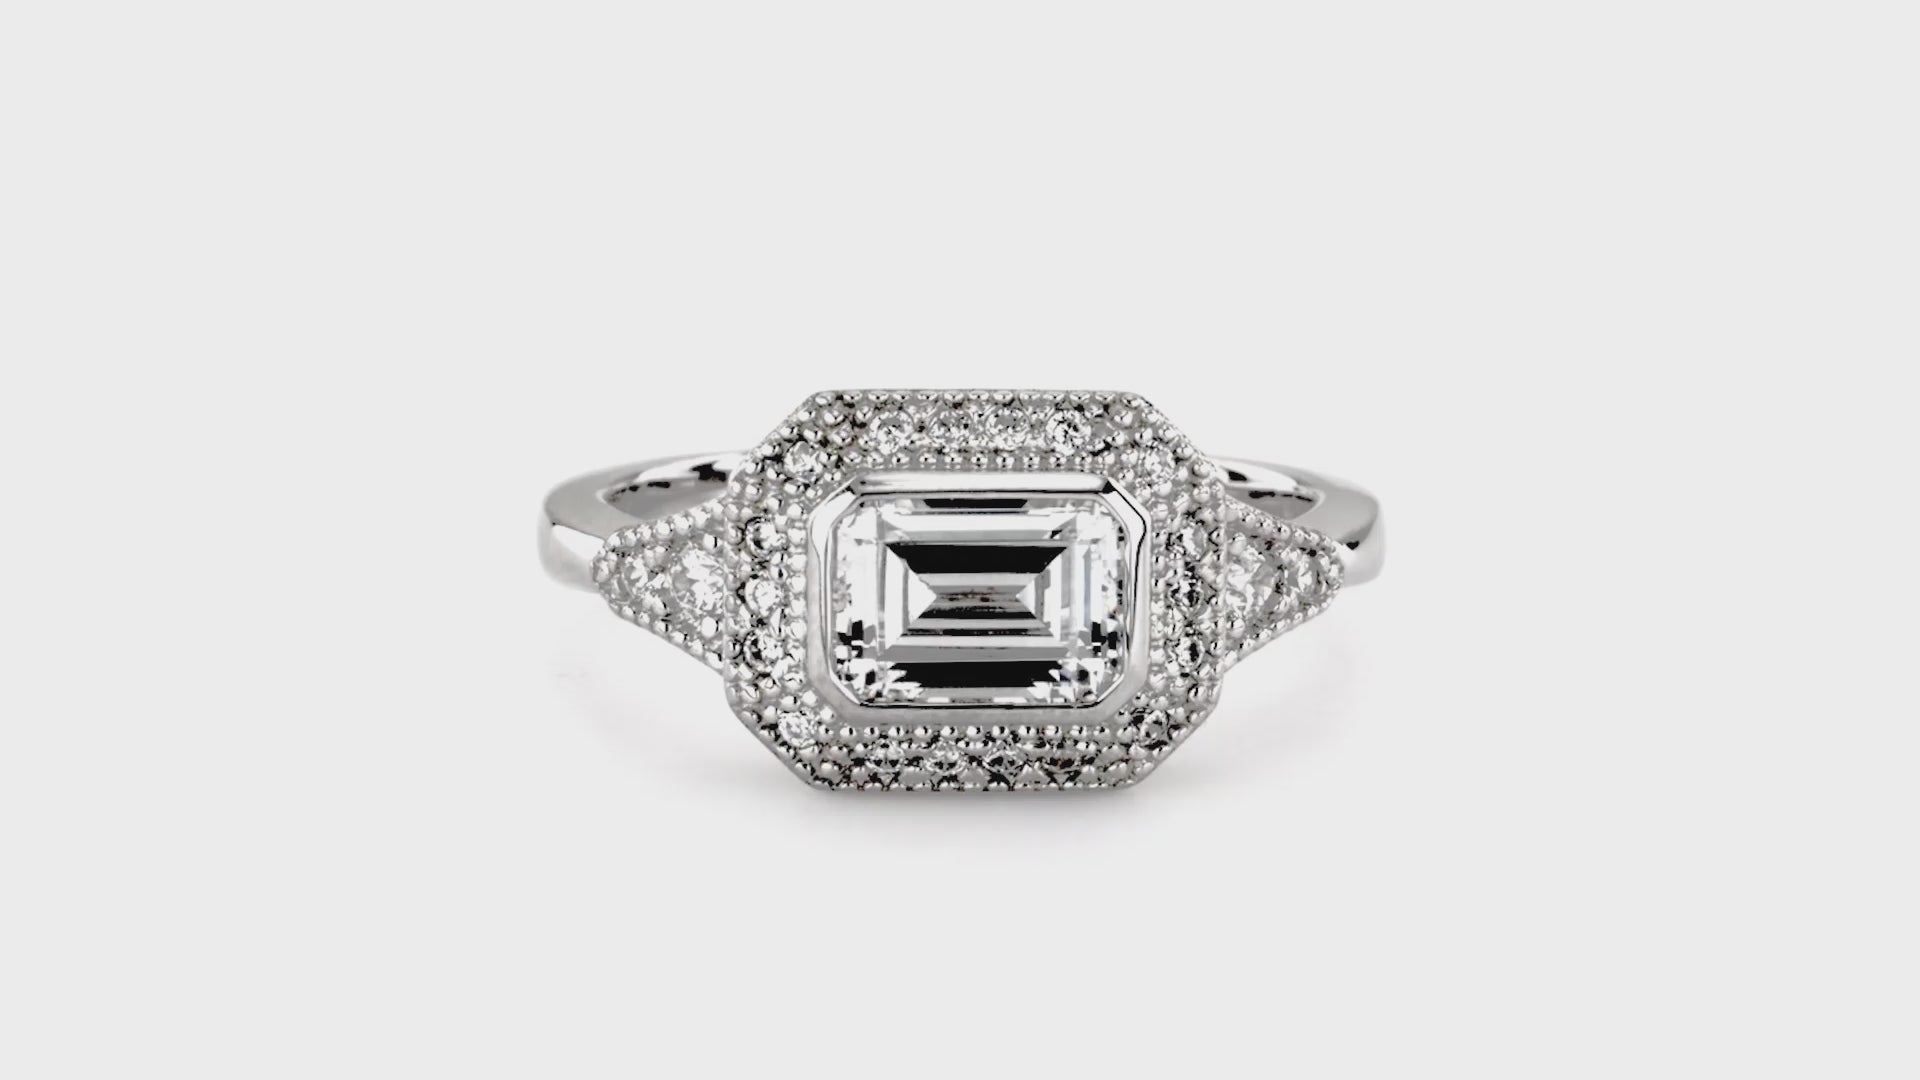 Video Contains Halo East-West Emerald Cut CZ Ring in Sterling Silver. Style Number R1496-01